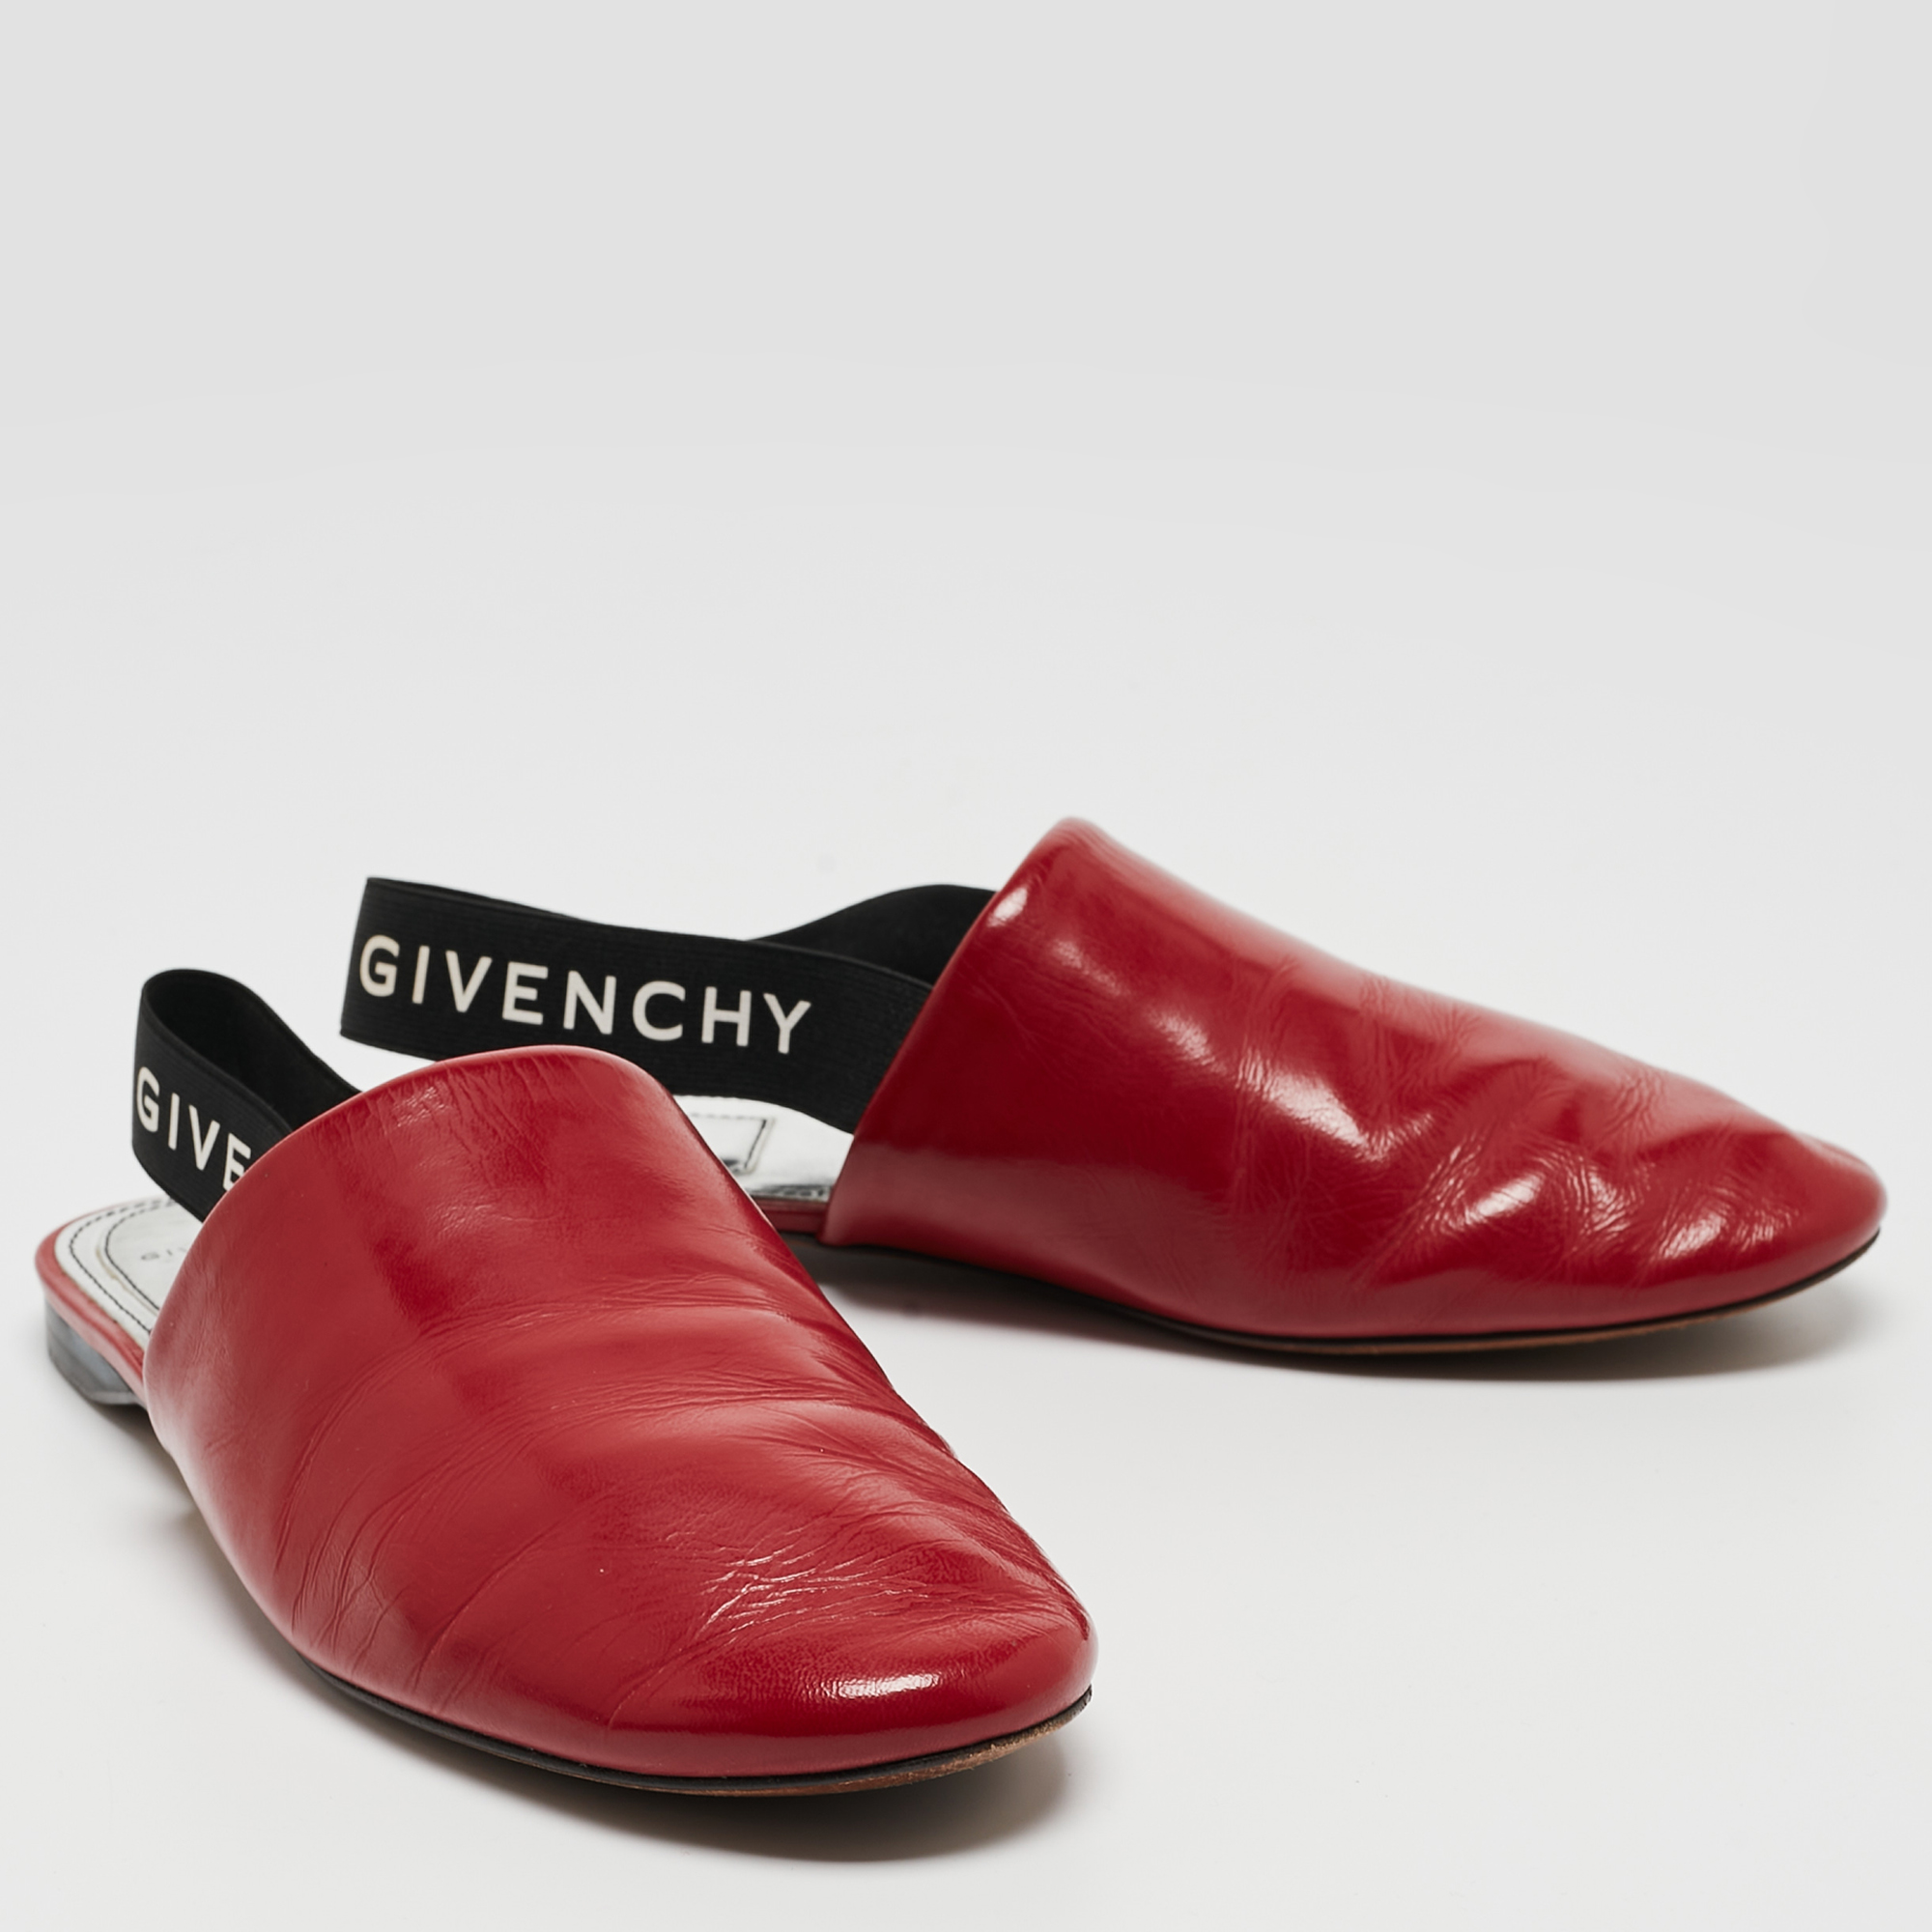 Givenchy Red Leather Rivington Slingback Flats Size 38